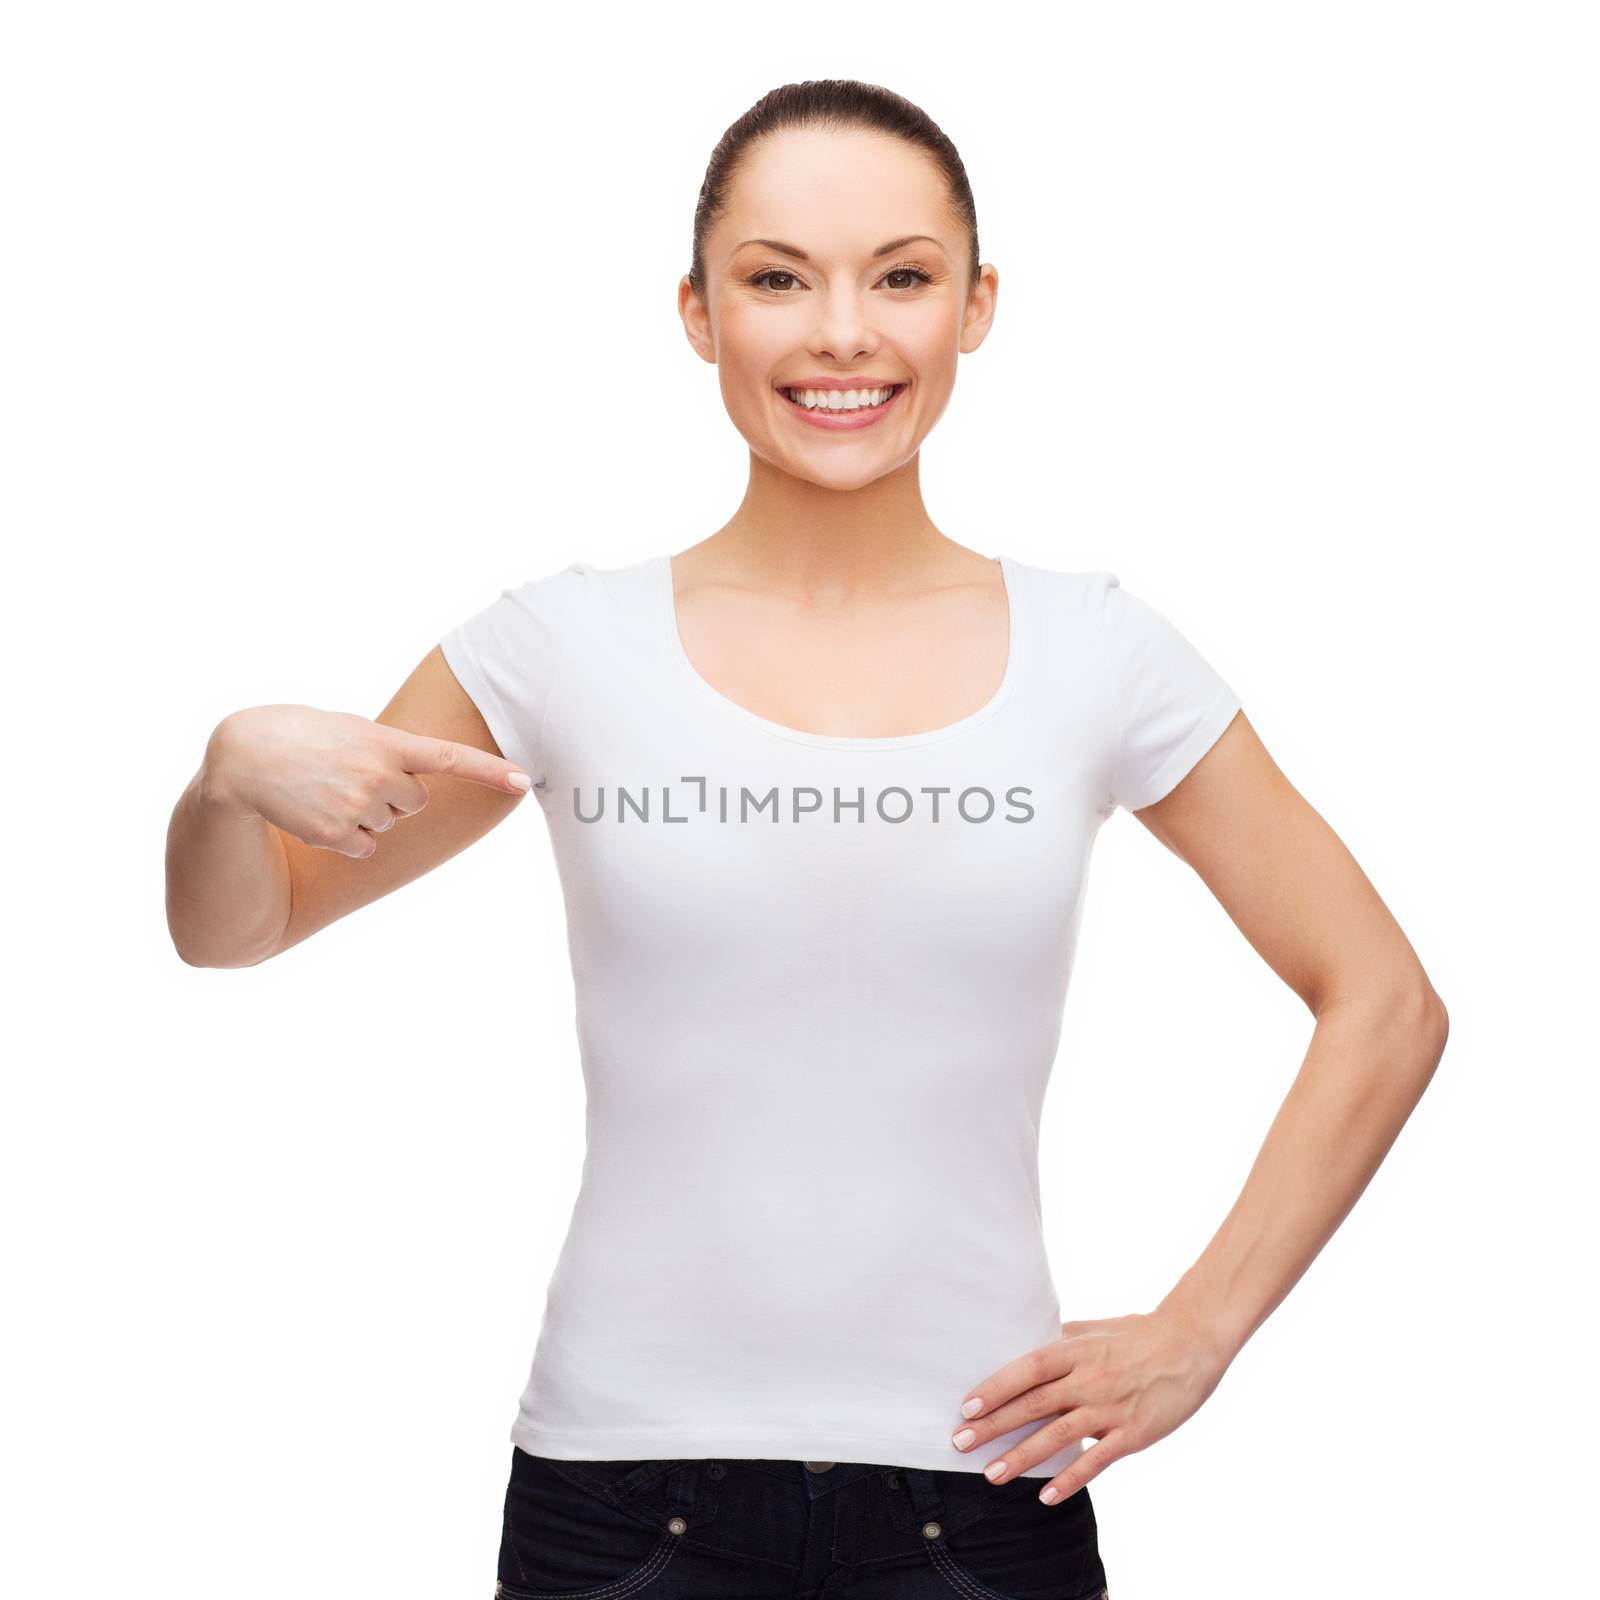 t-shirt design concept - smiling woman in blank white t-shirt pointing at herself